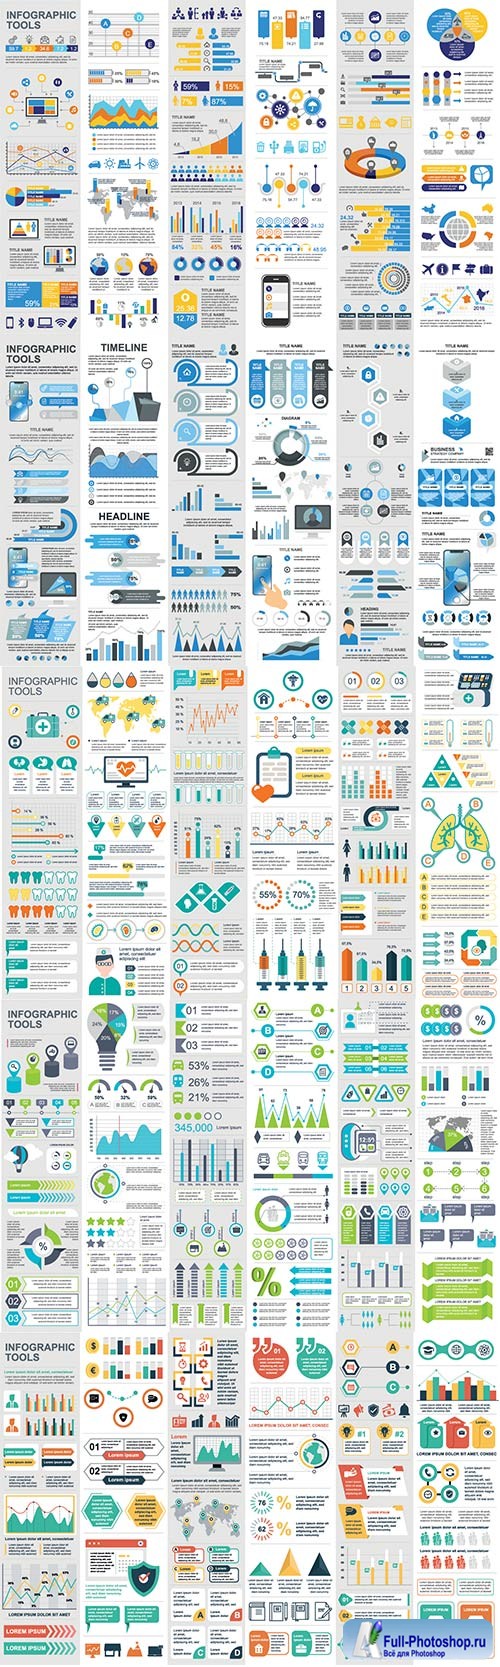 Infographic elements data visualization vector # 2